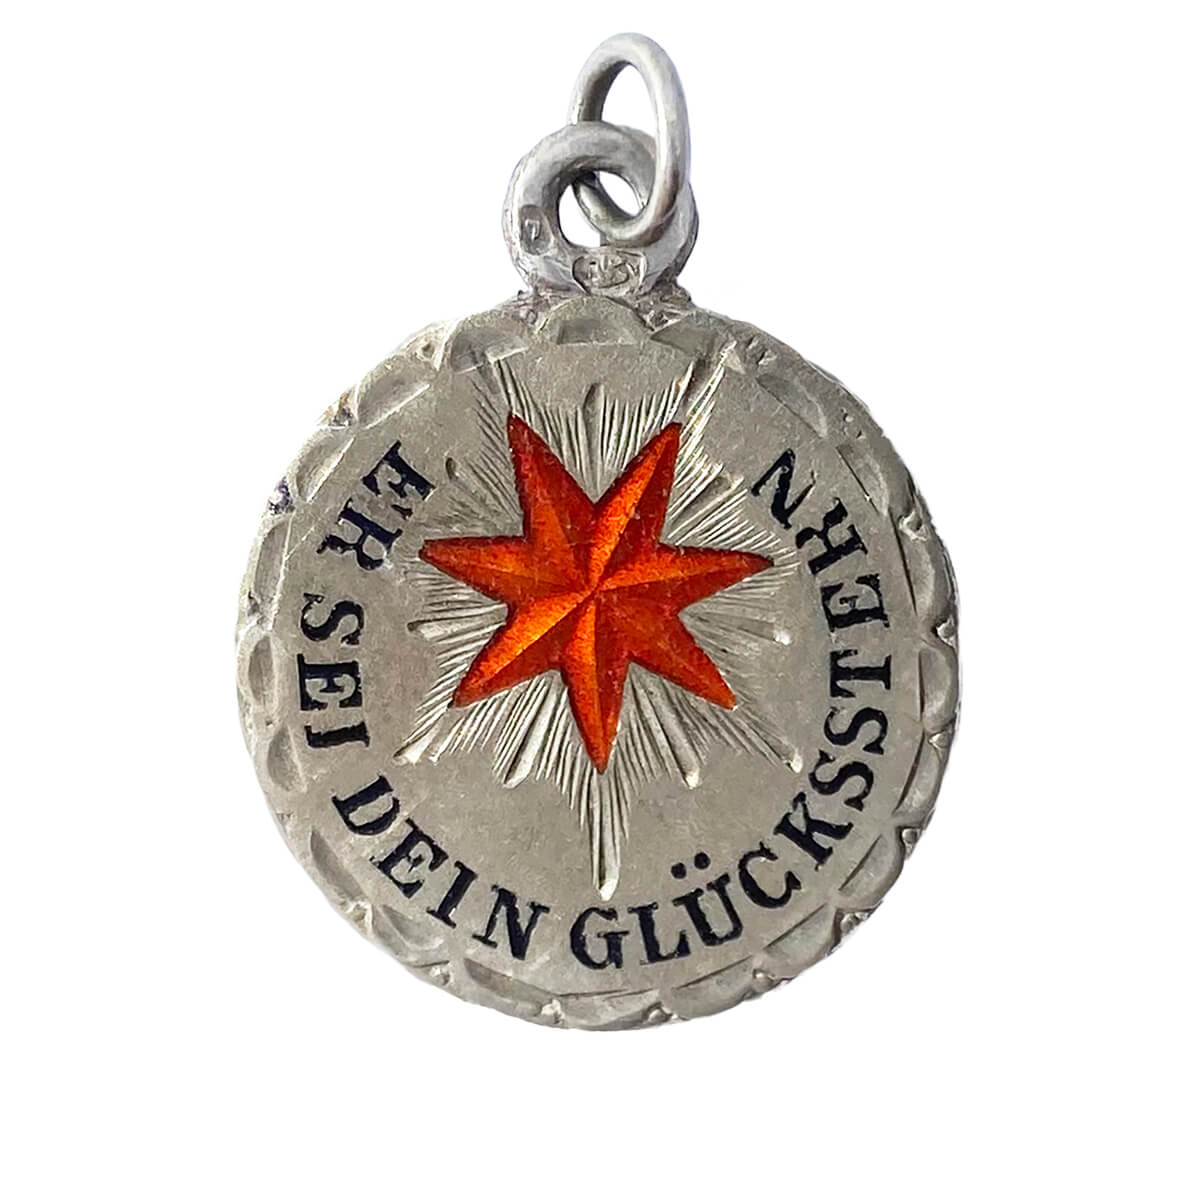 Antique lucky star charm silver with red enamel